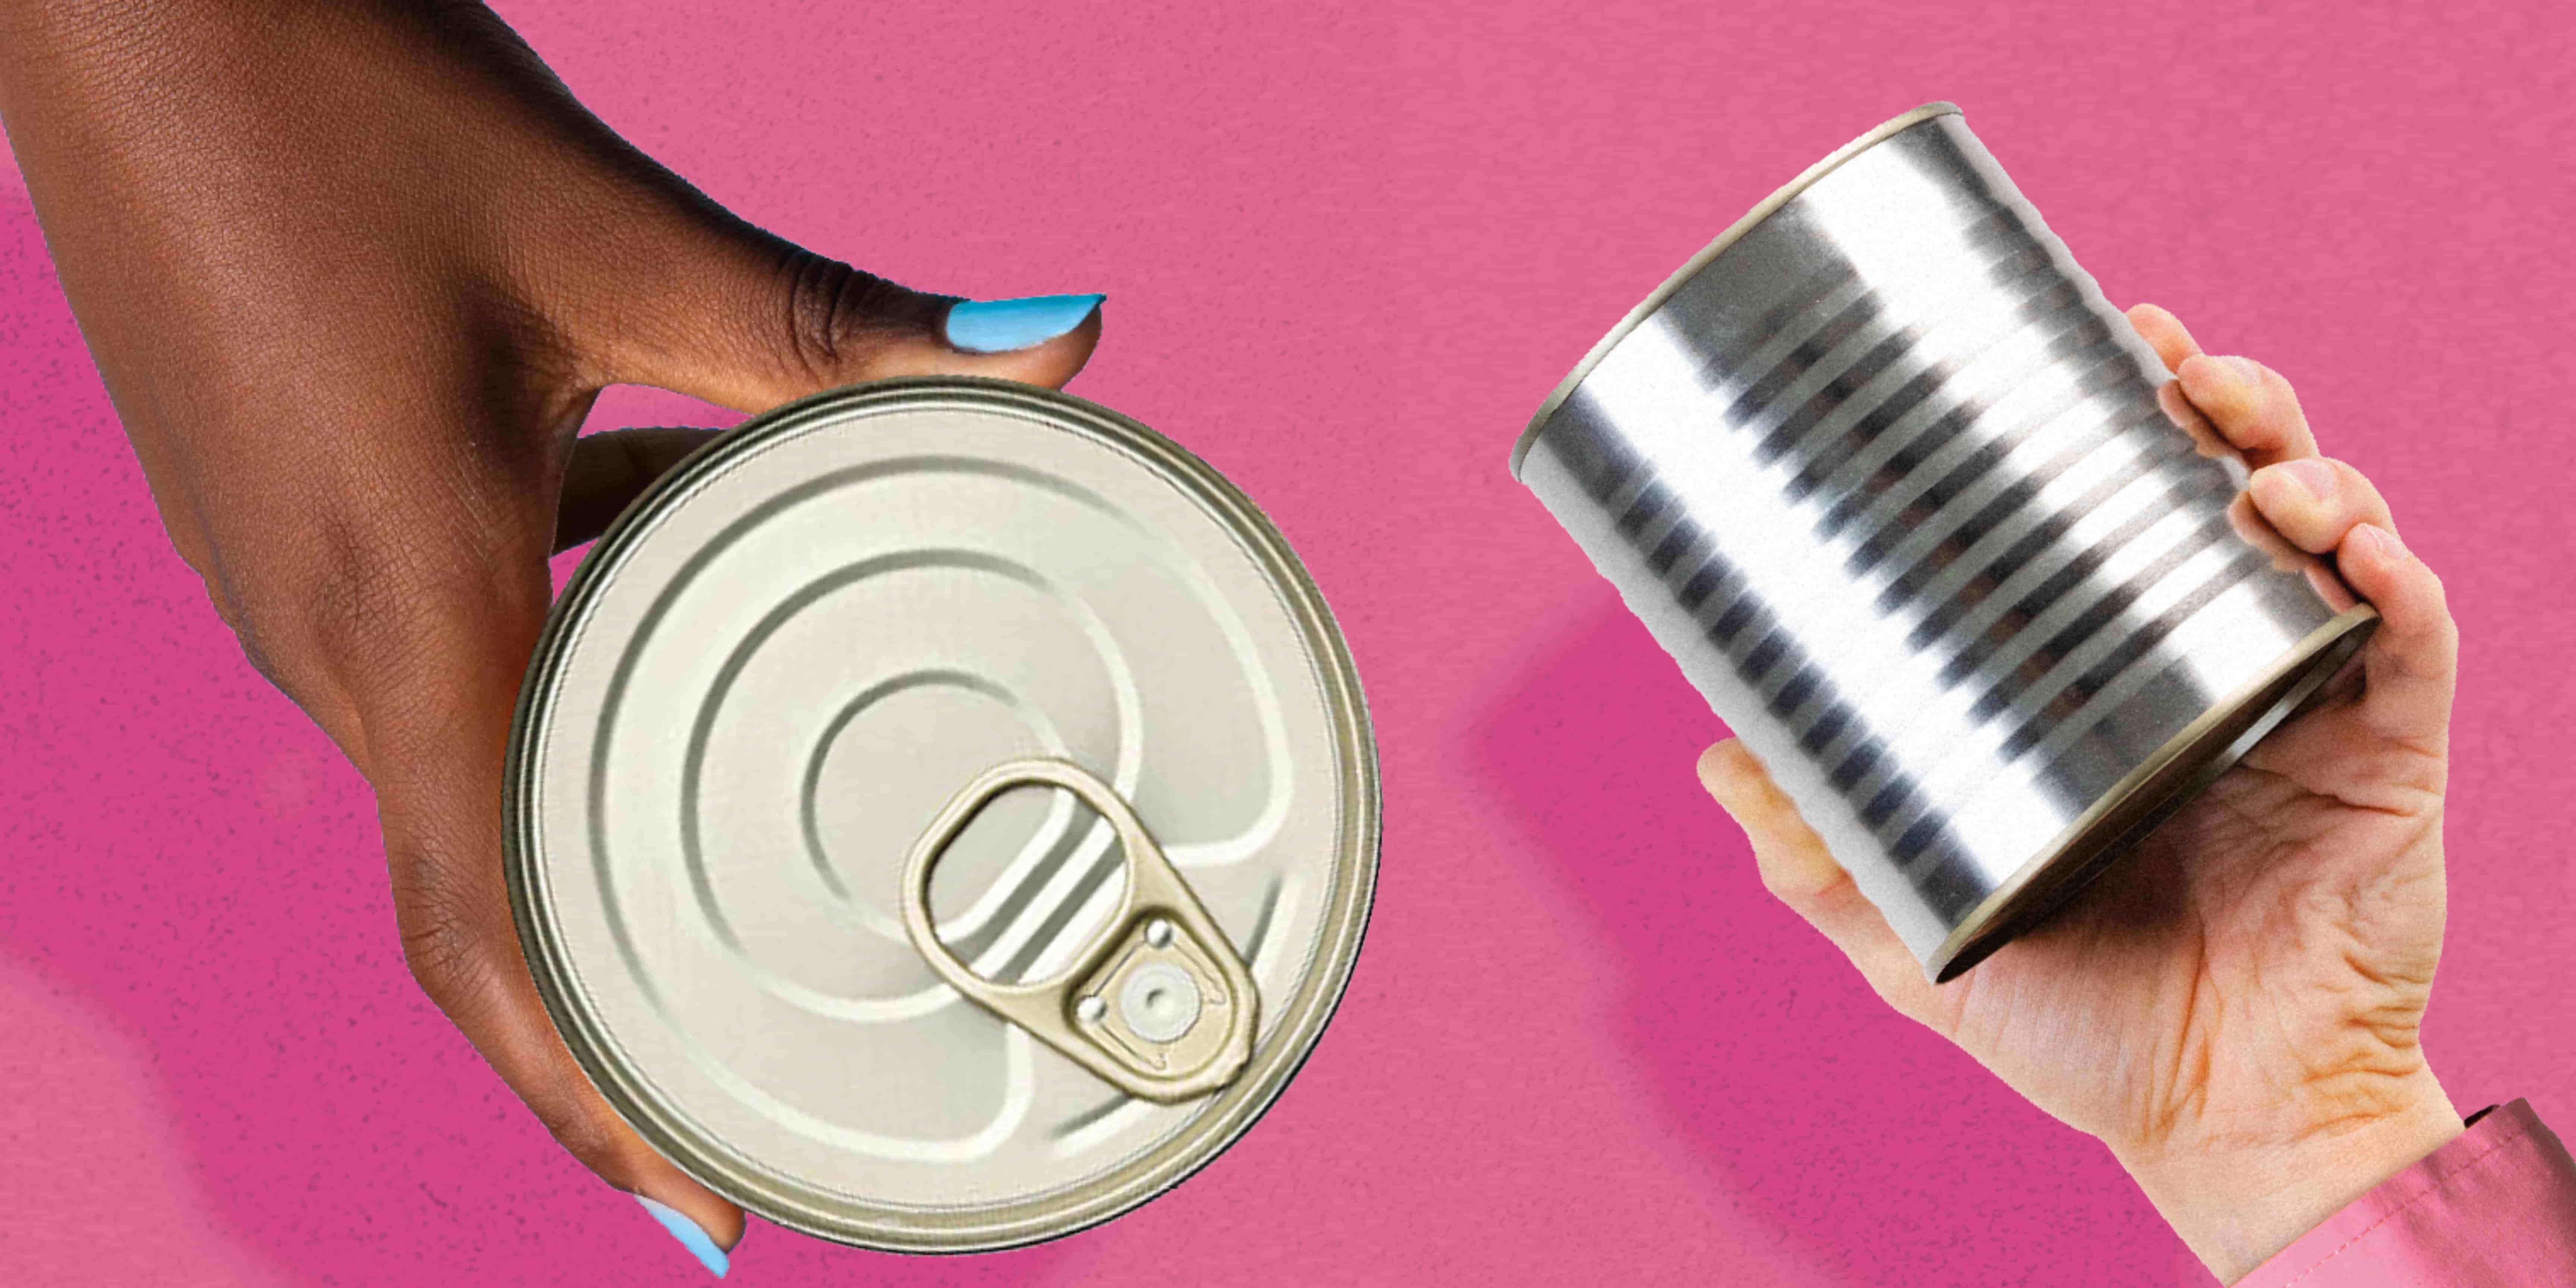 Hands holding canned products over a pink background